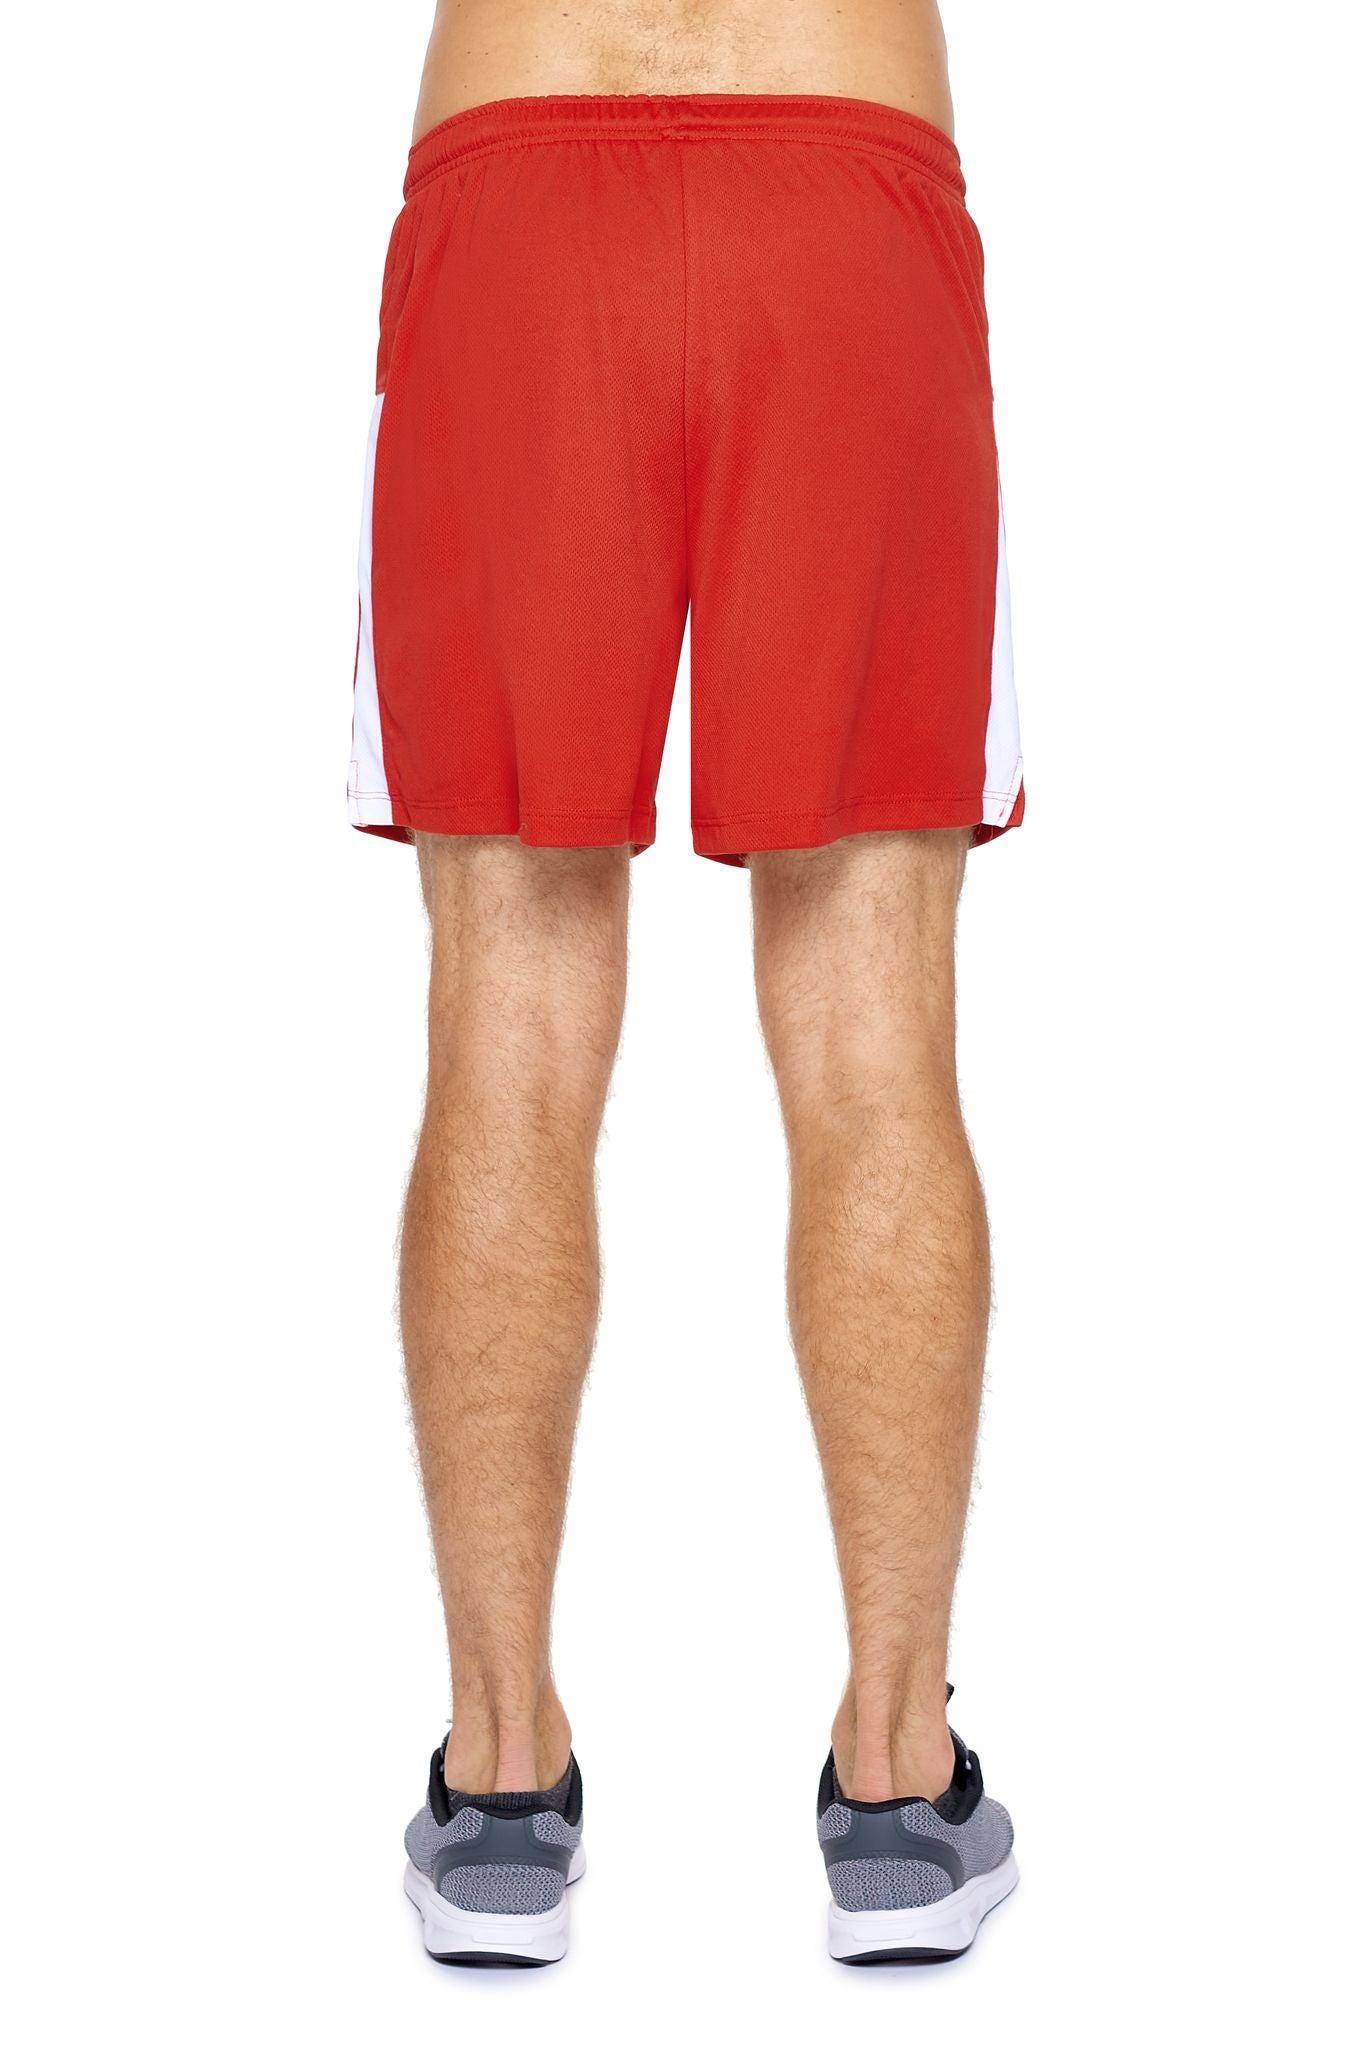 Oxymesh™ Premium Shorts 🇺🇸 - Expert Brand Apparel#color_red-white